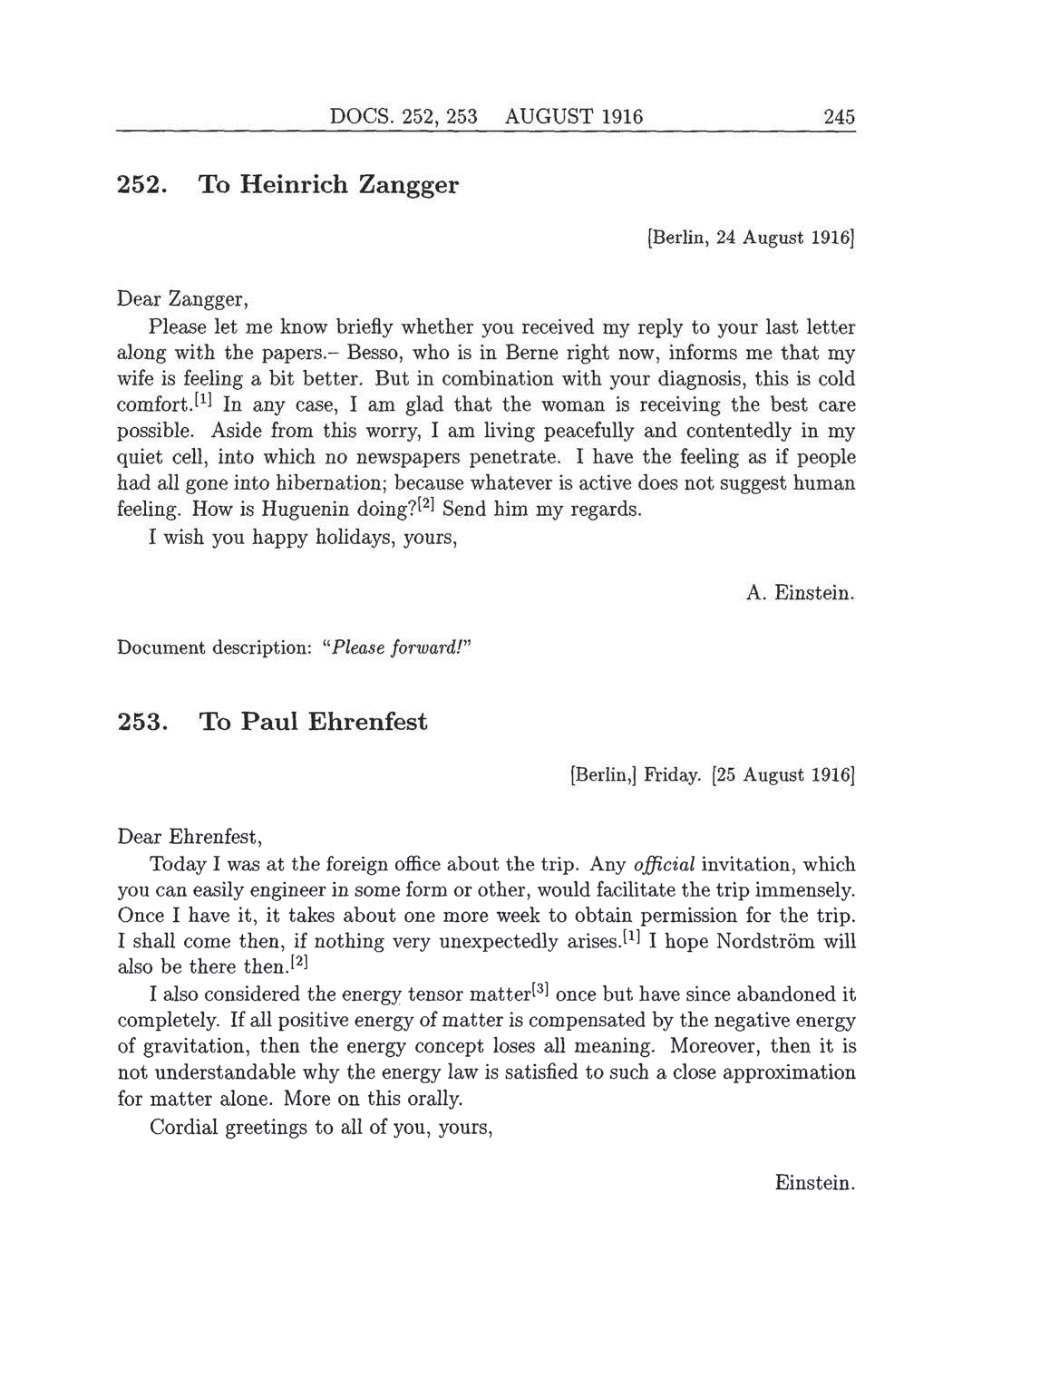 Volume 8: The Berlin Years: Correspondence, 1914-1918 (English translation supplement) page 245